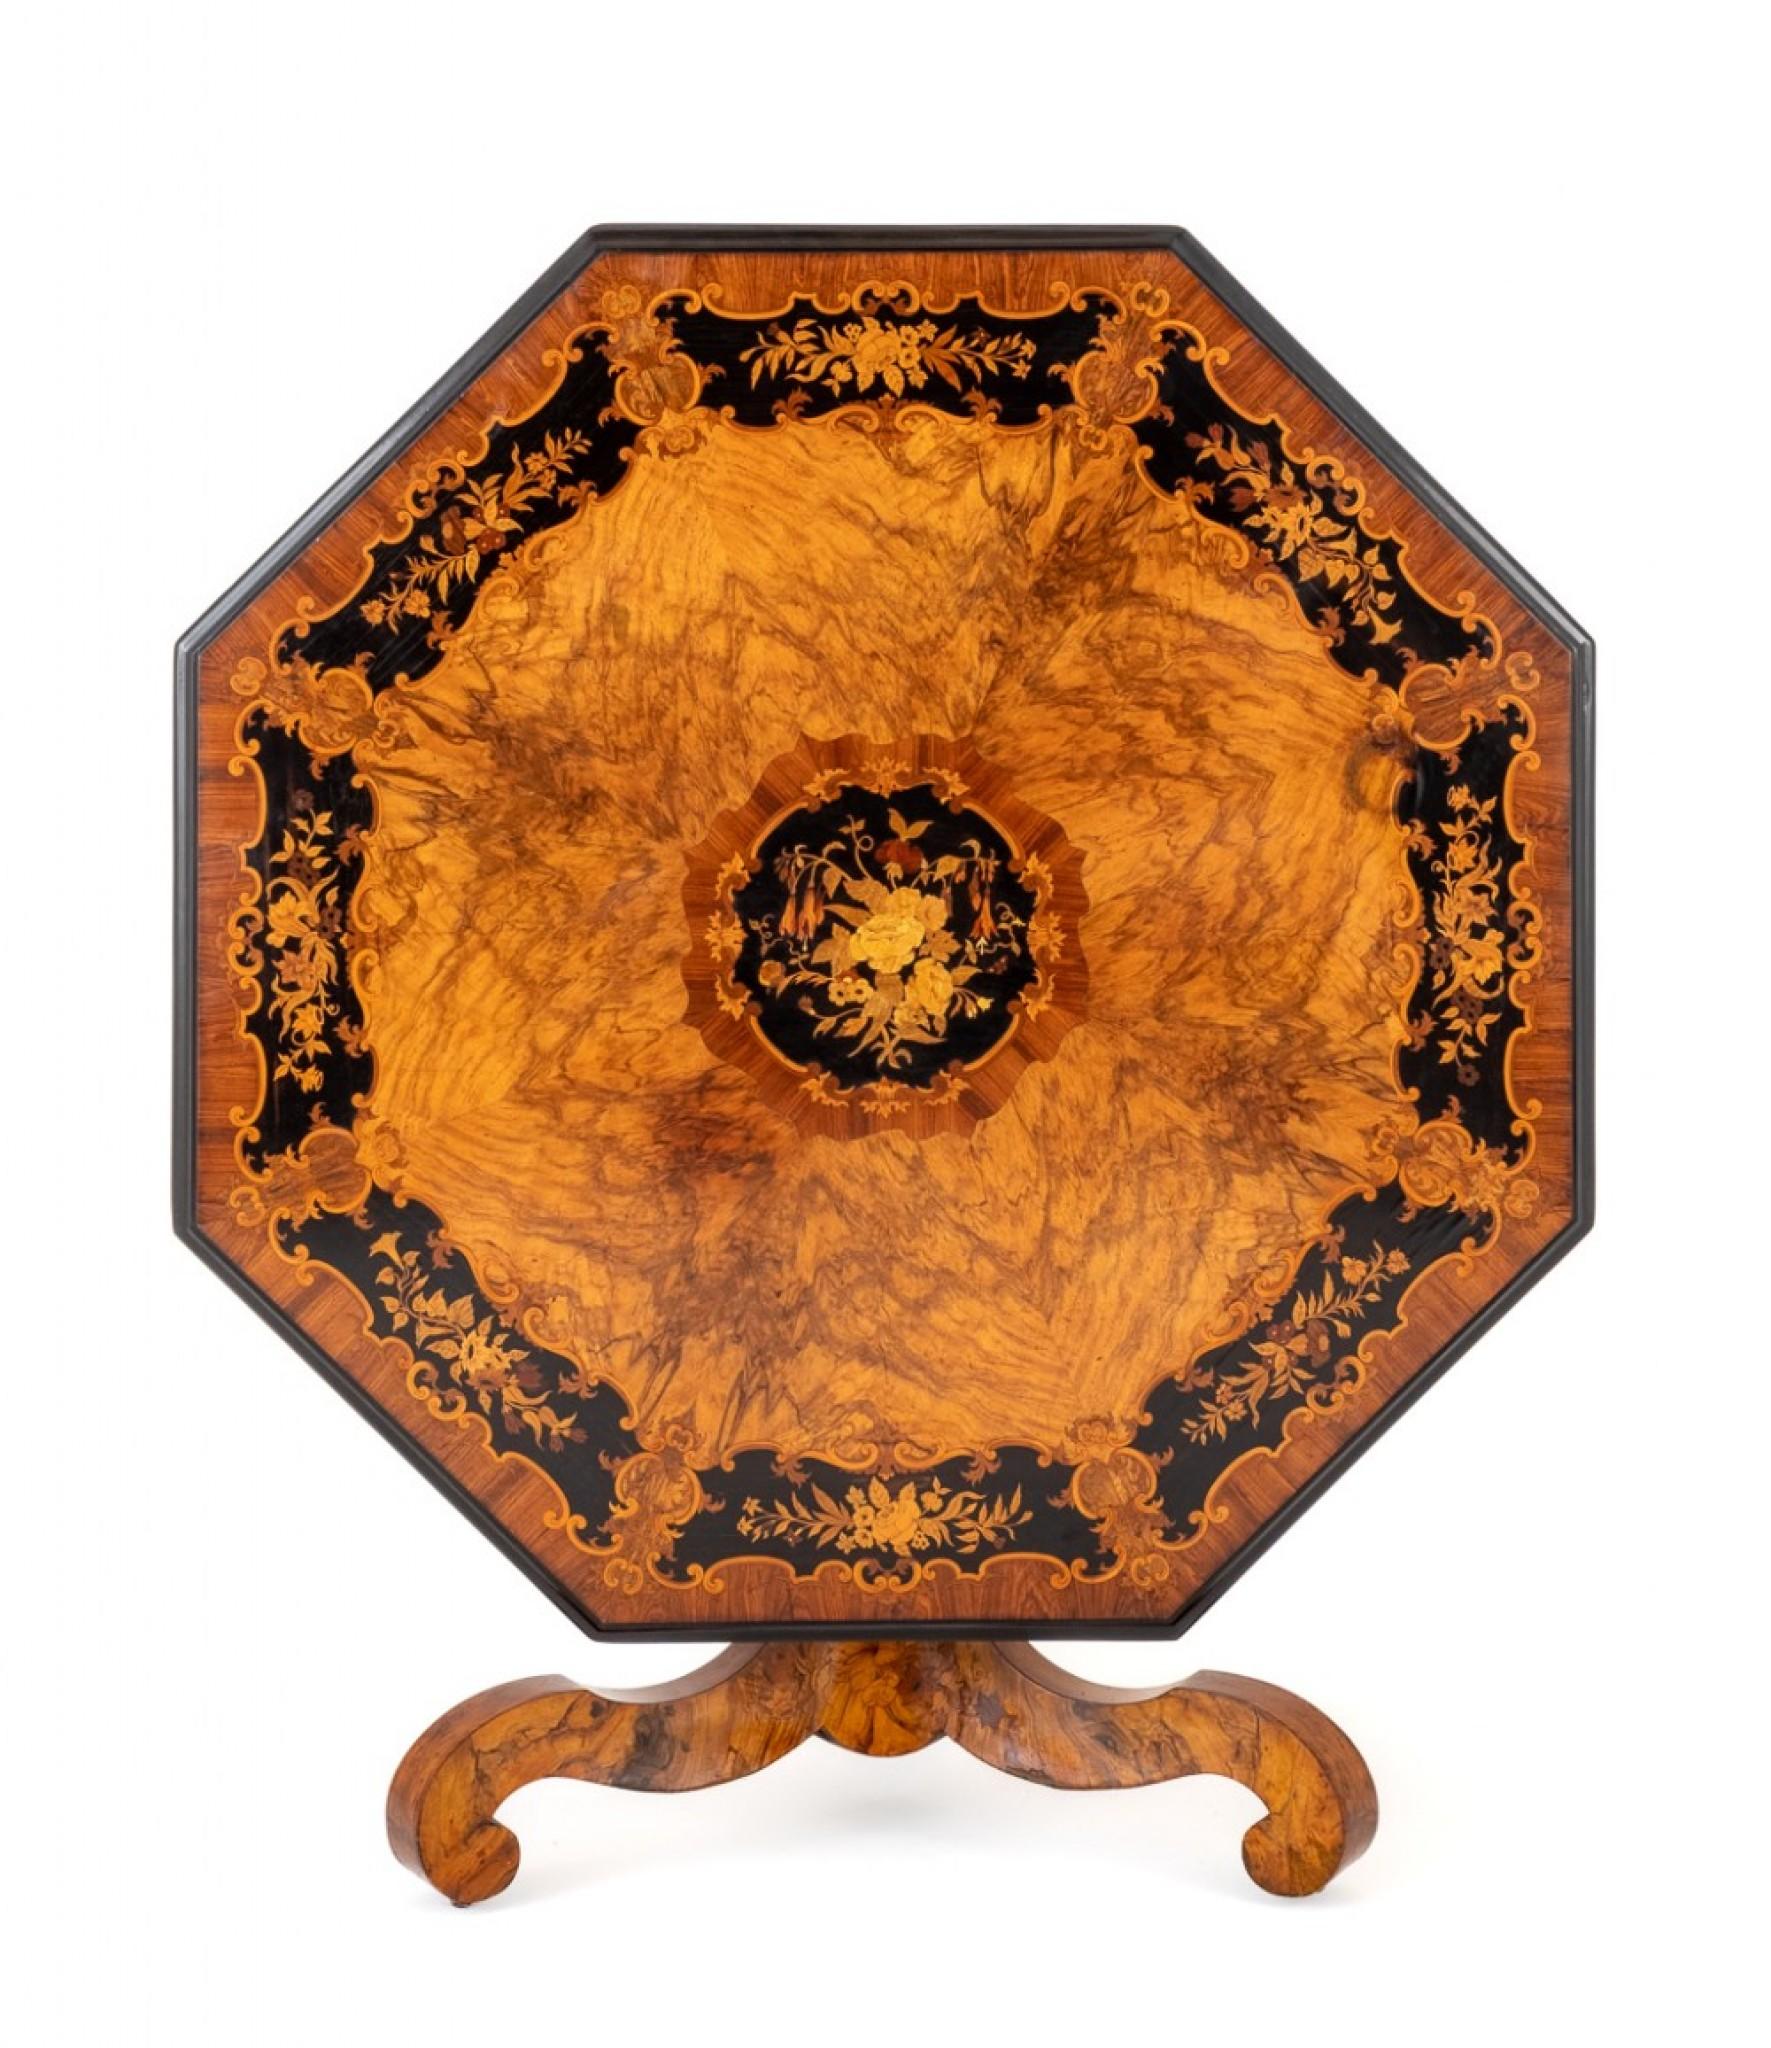 A Stunning Walnut and Marquetry Centre Table.
The Table is Octagonal in Shape with a Central Marquetry Panel.
The Border Also with Marquetry Panels Set in Ebony.
The Frieze of the Table Being of Burr Yew Wood with Rosewood Cross-banding.
The